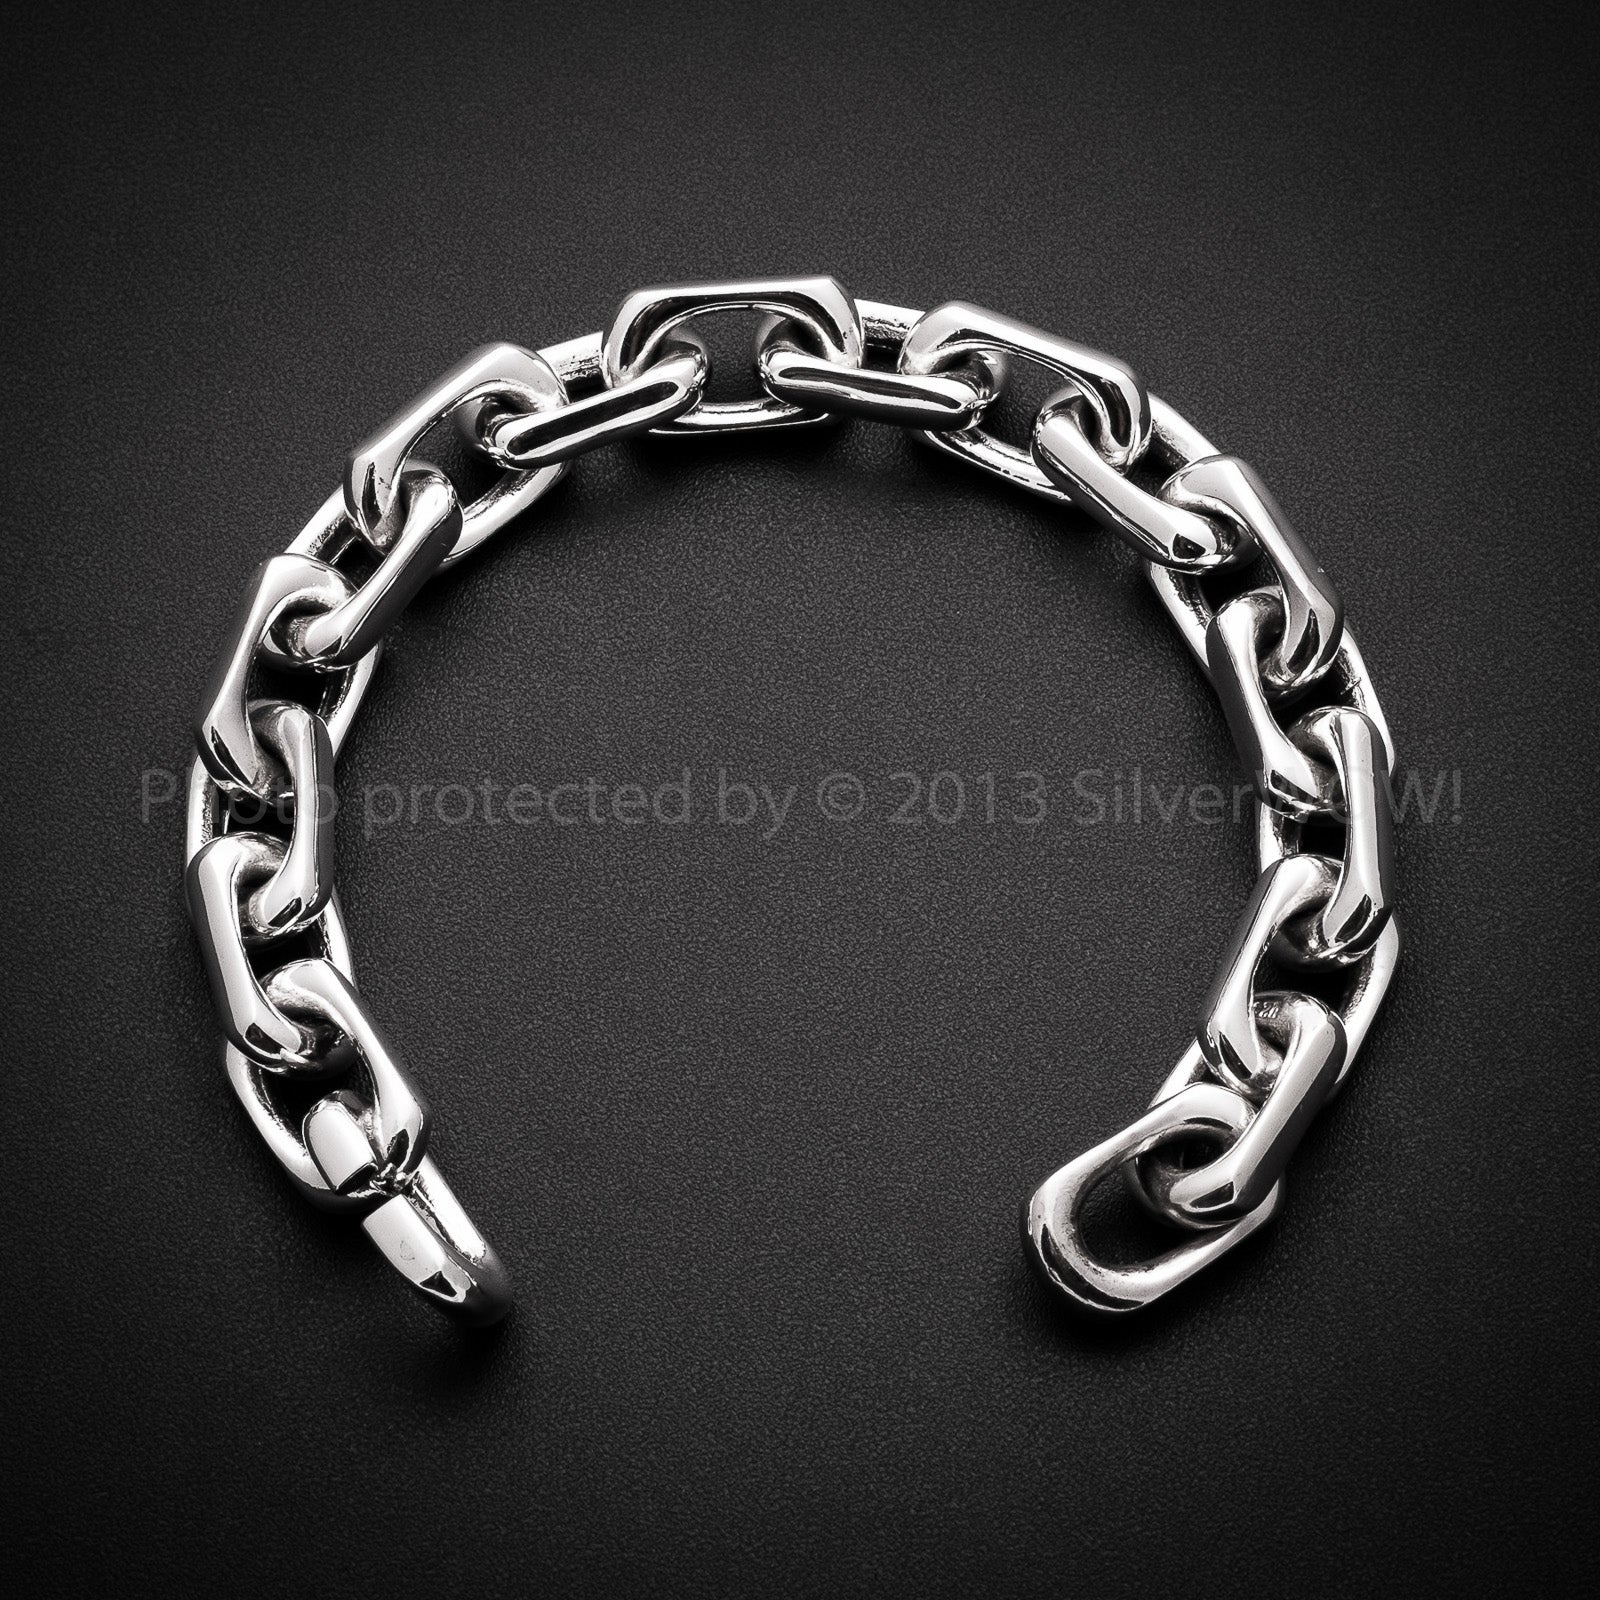 12mm Thick Mens Chain Link Silver Bracelet Top